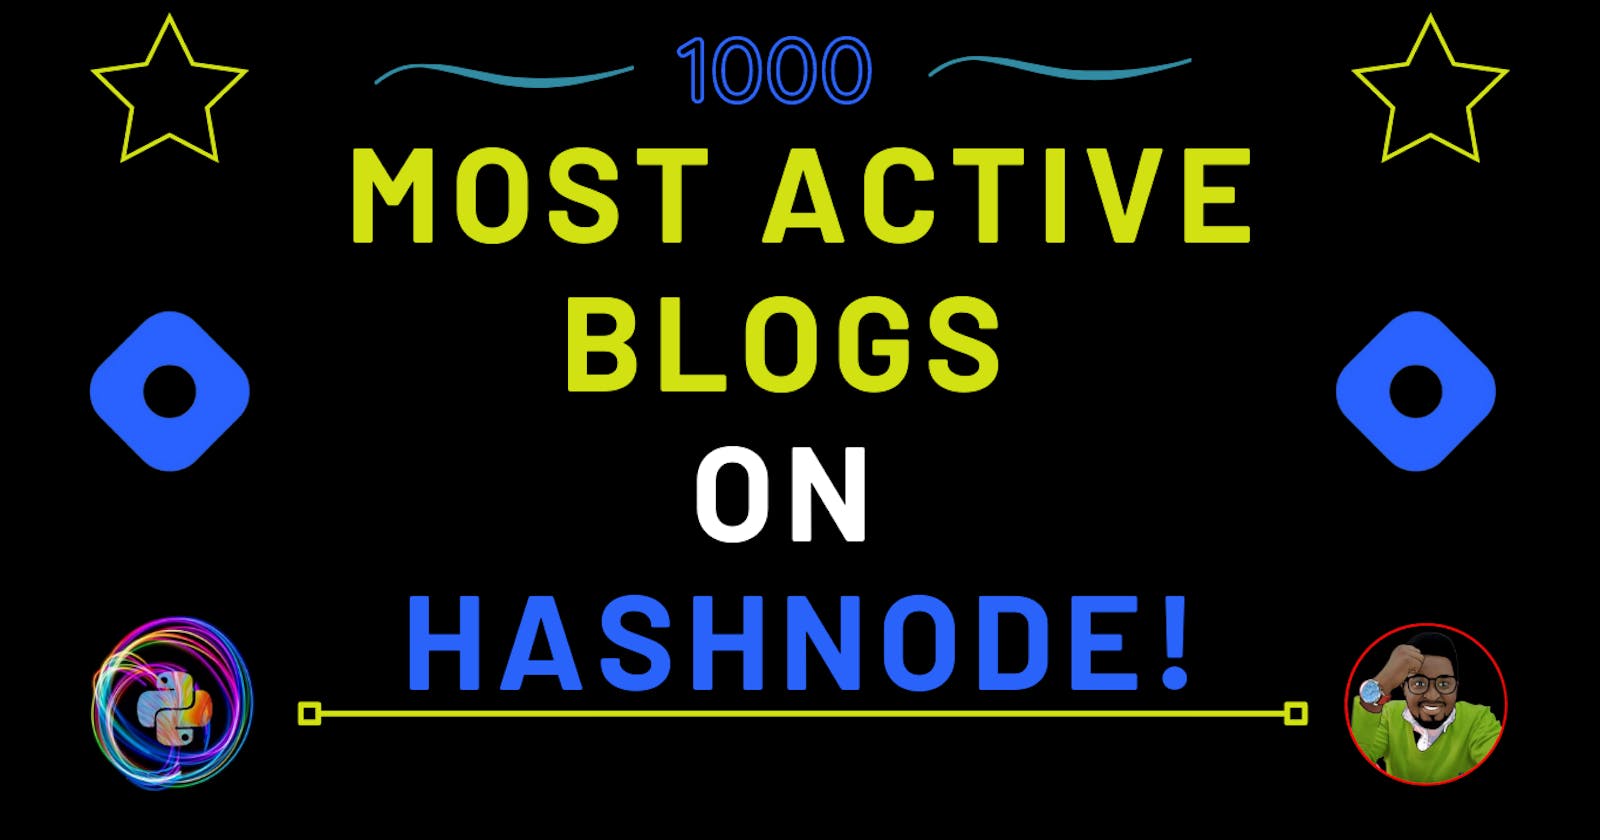 1000 Most Active  Blogs On Hashnode!